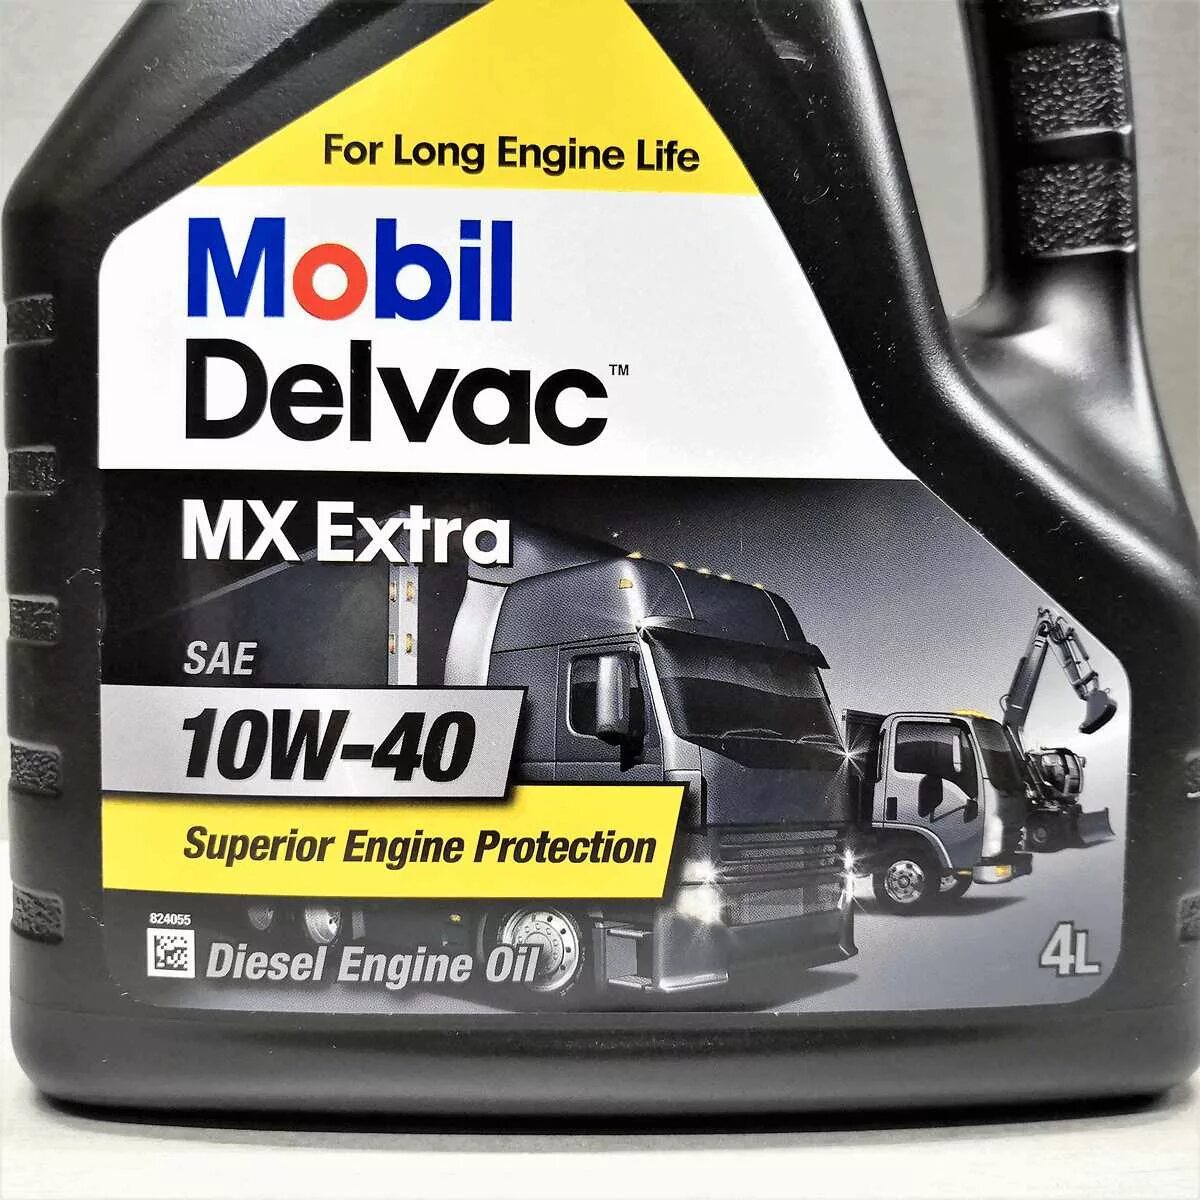 Масло mobil extra. Мобил Делвак МХ Экстра 10w 40. Масло моторное mobil Delvac MX Extra 10w 40. Mobil Delvac MX Extra 10w 40 20 л 152673. Мобил Делвак 10w 40 4.